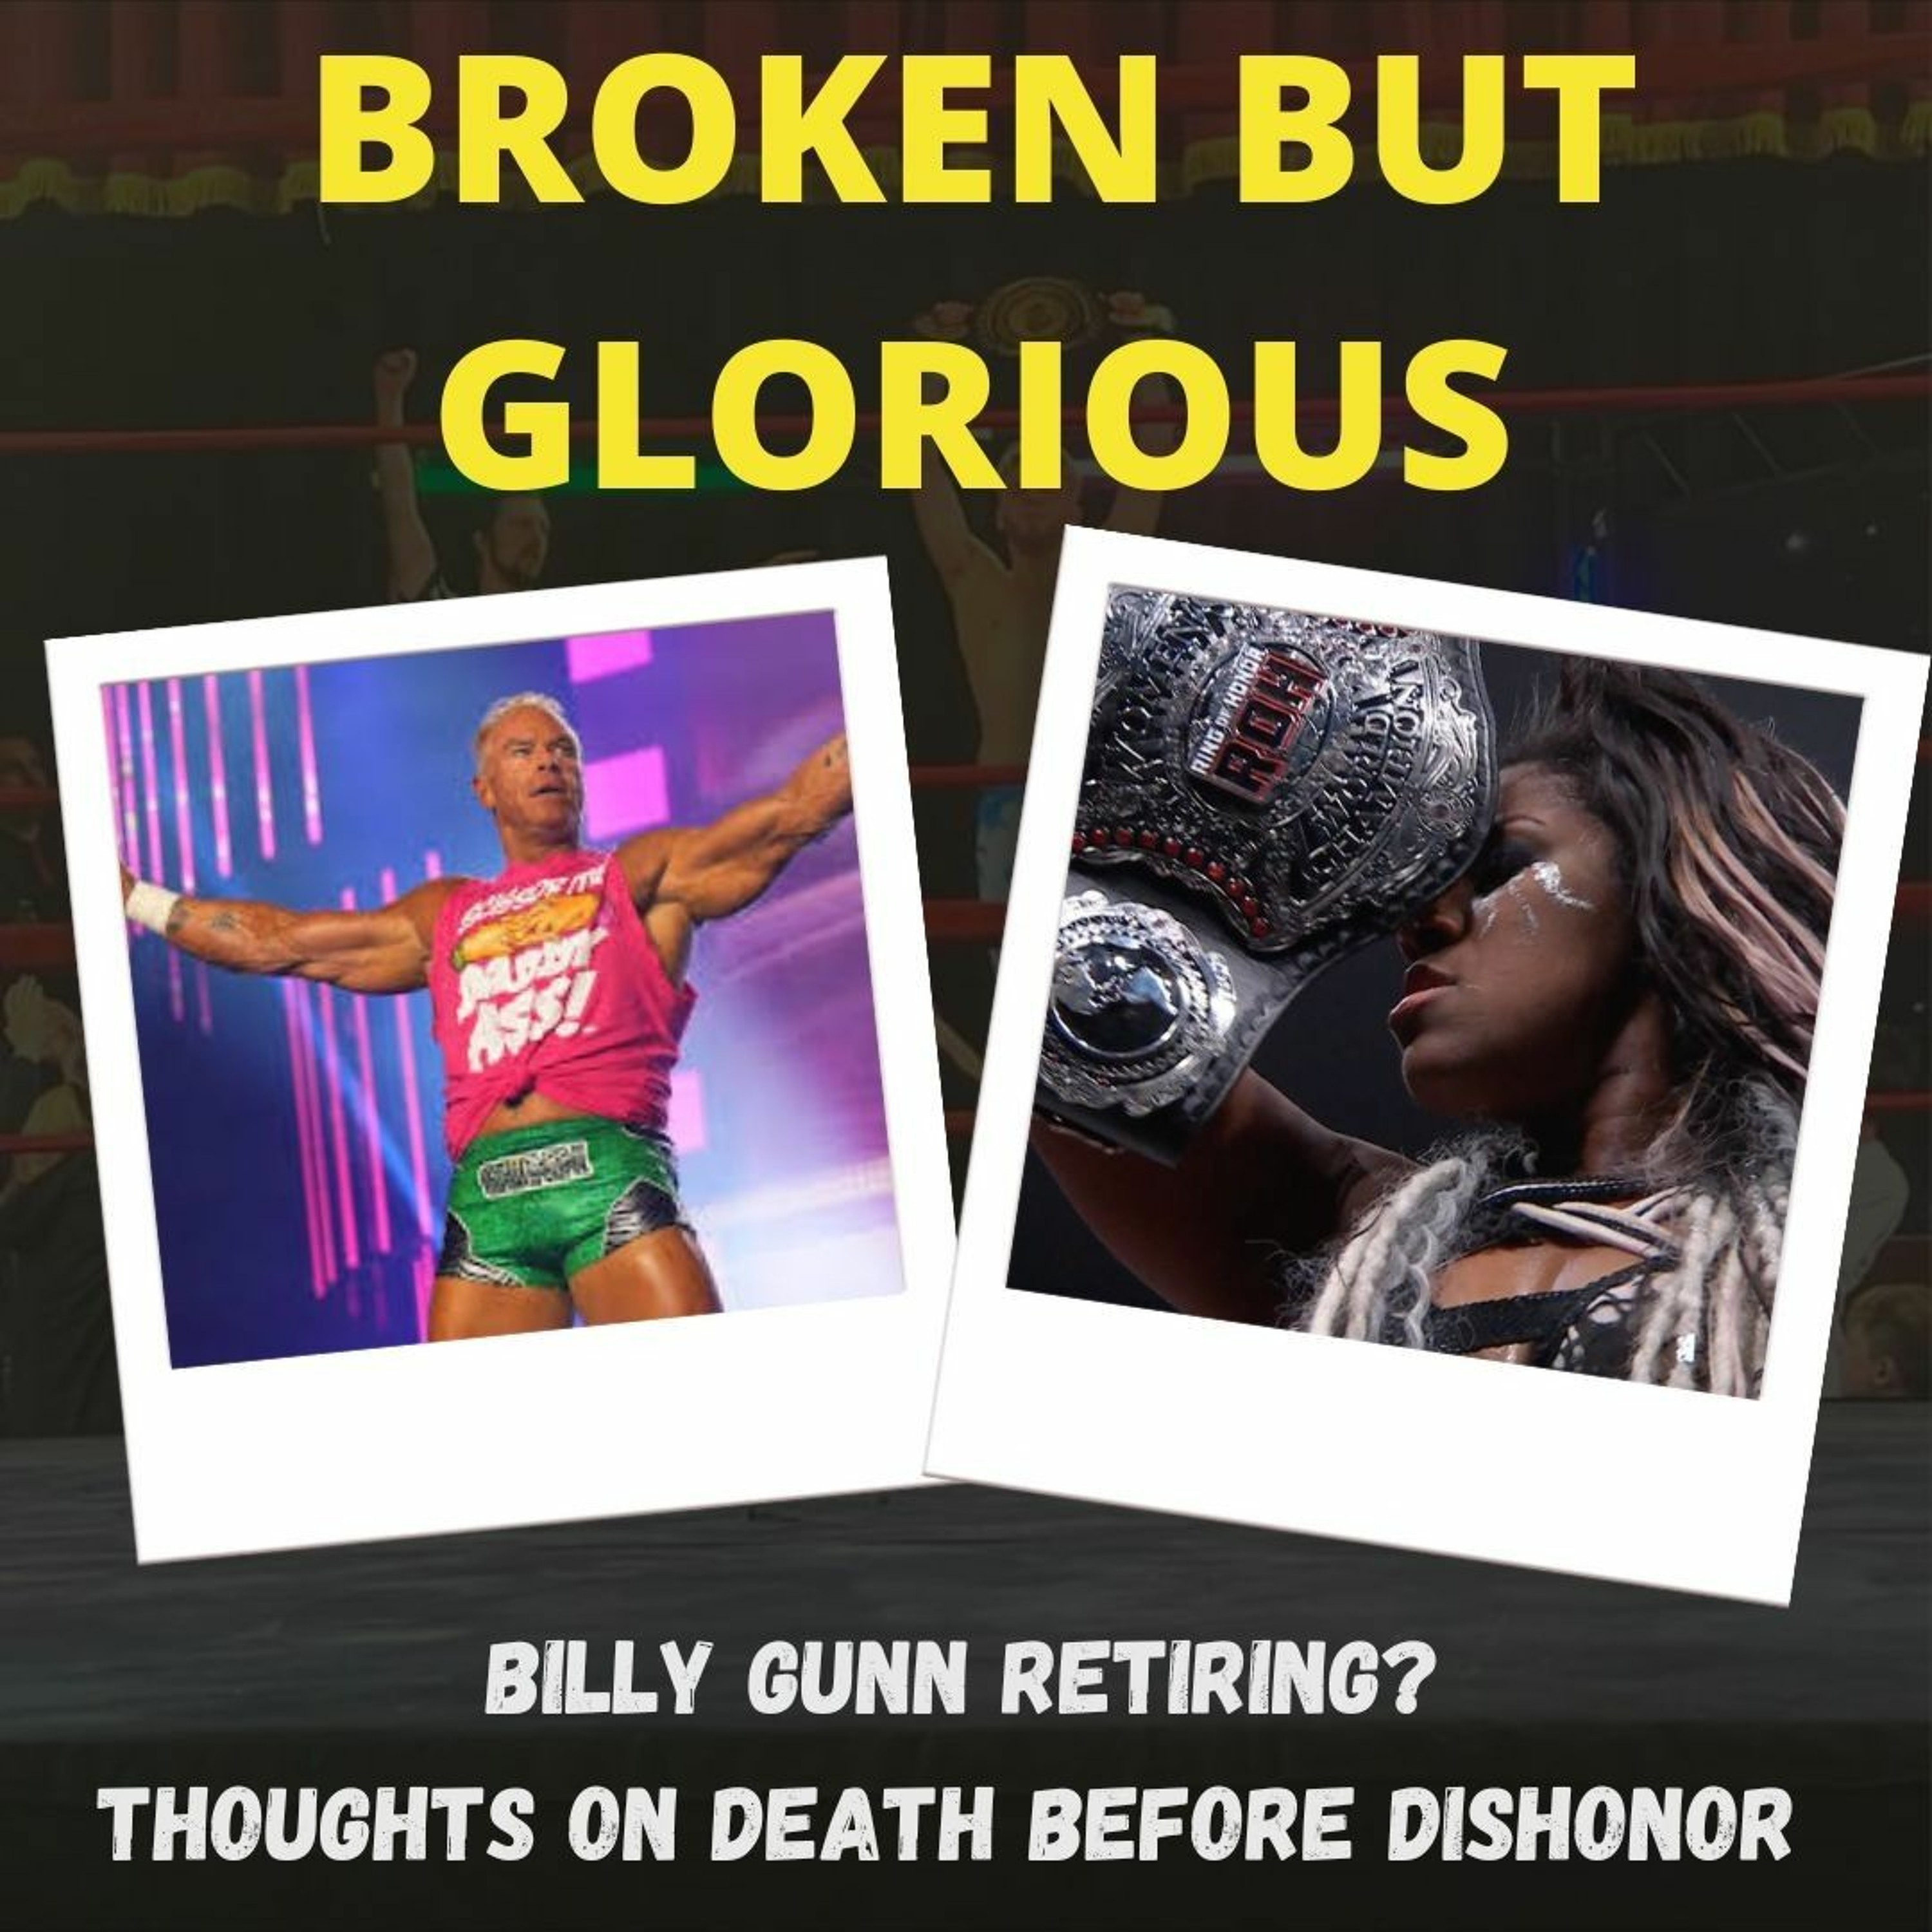 Billy Gunn Retiring? Thoughts on Death Before Dishonor